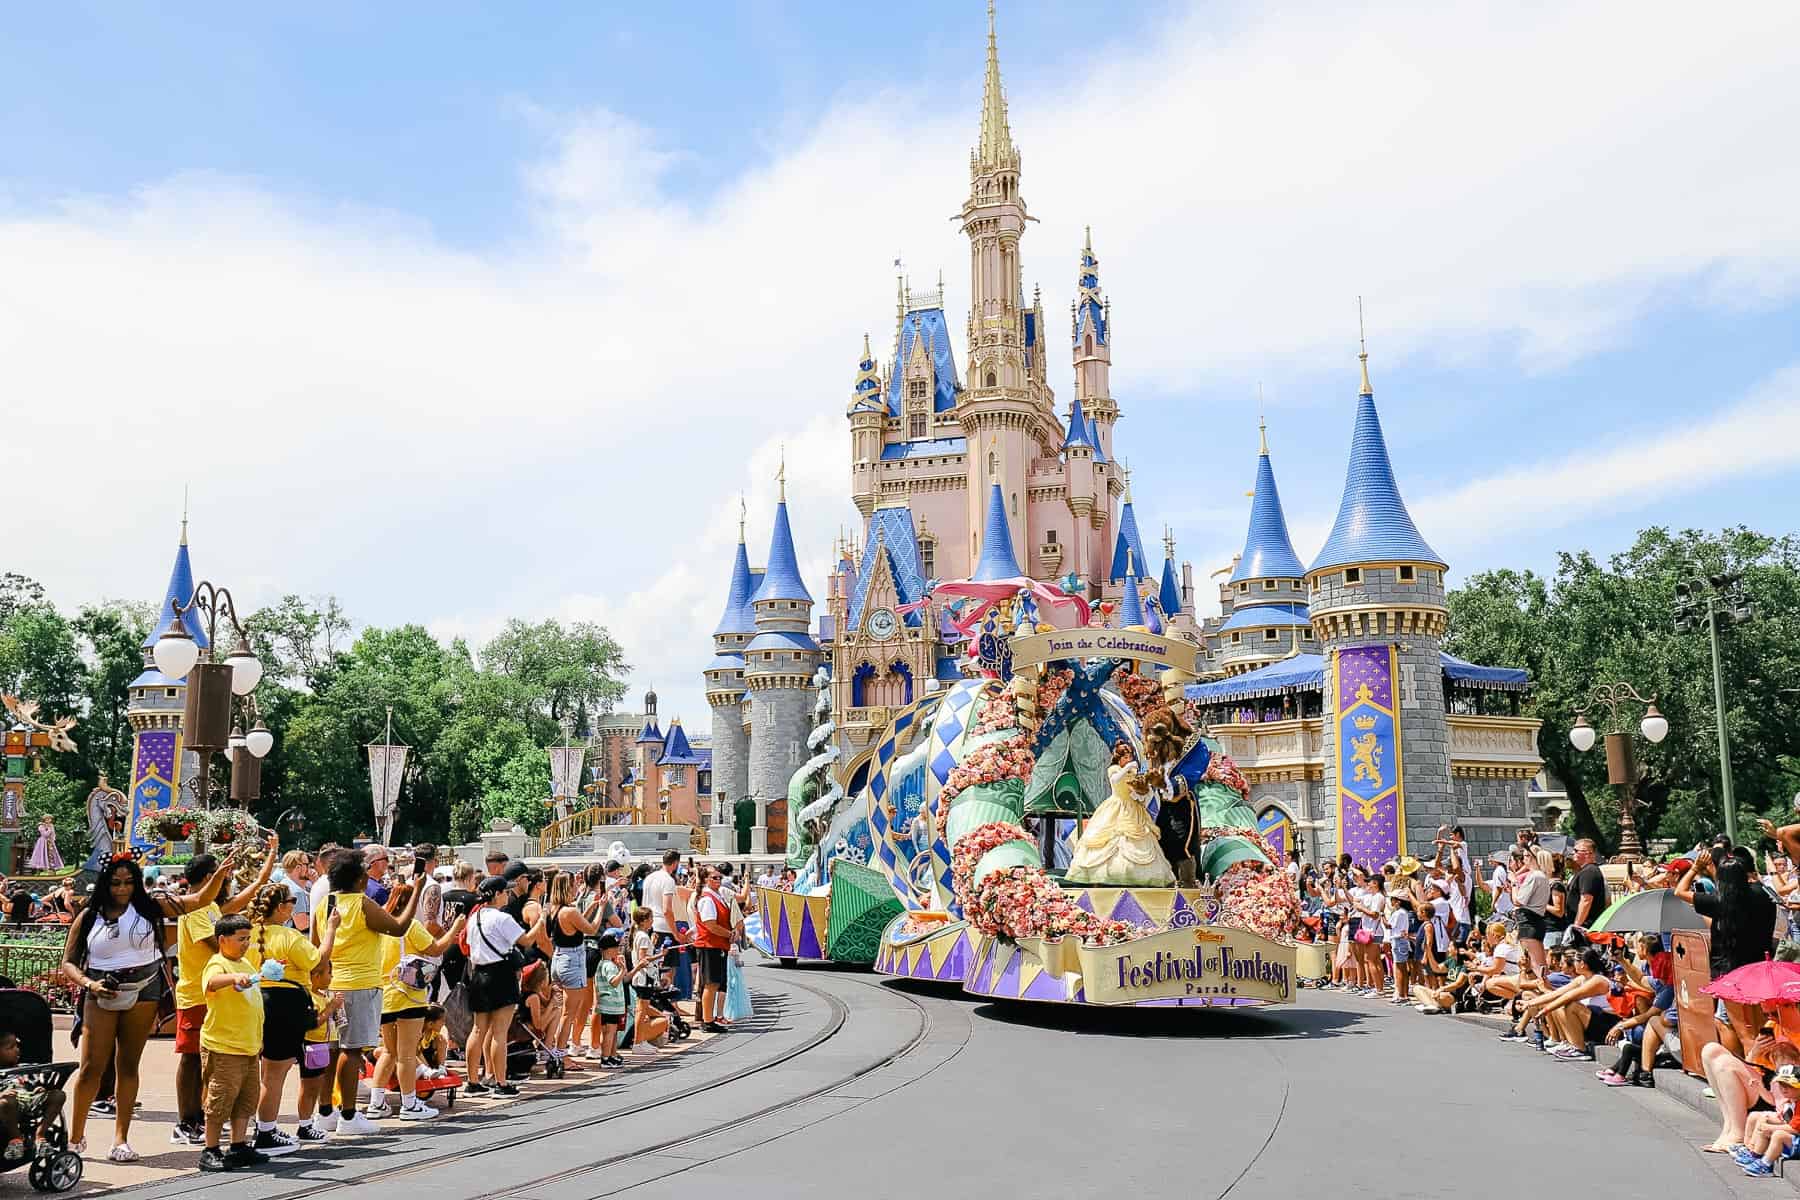 Beauty and the Beast at the front of the princess float as they pass Cinderella Castle on the Festival of Fantasy Parade Route. 